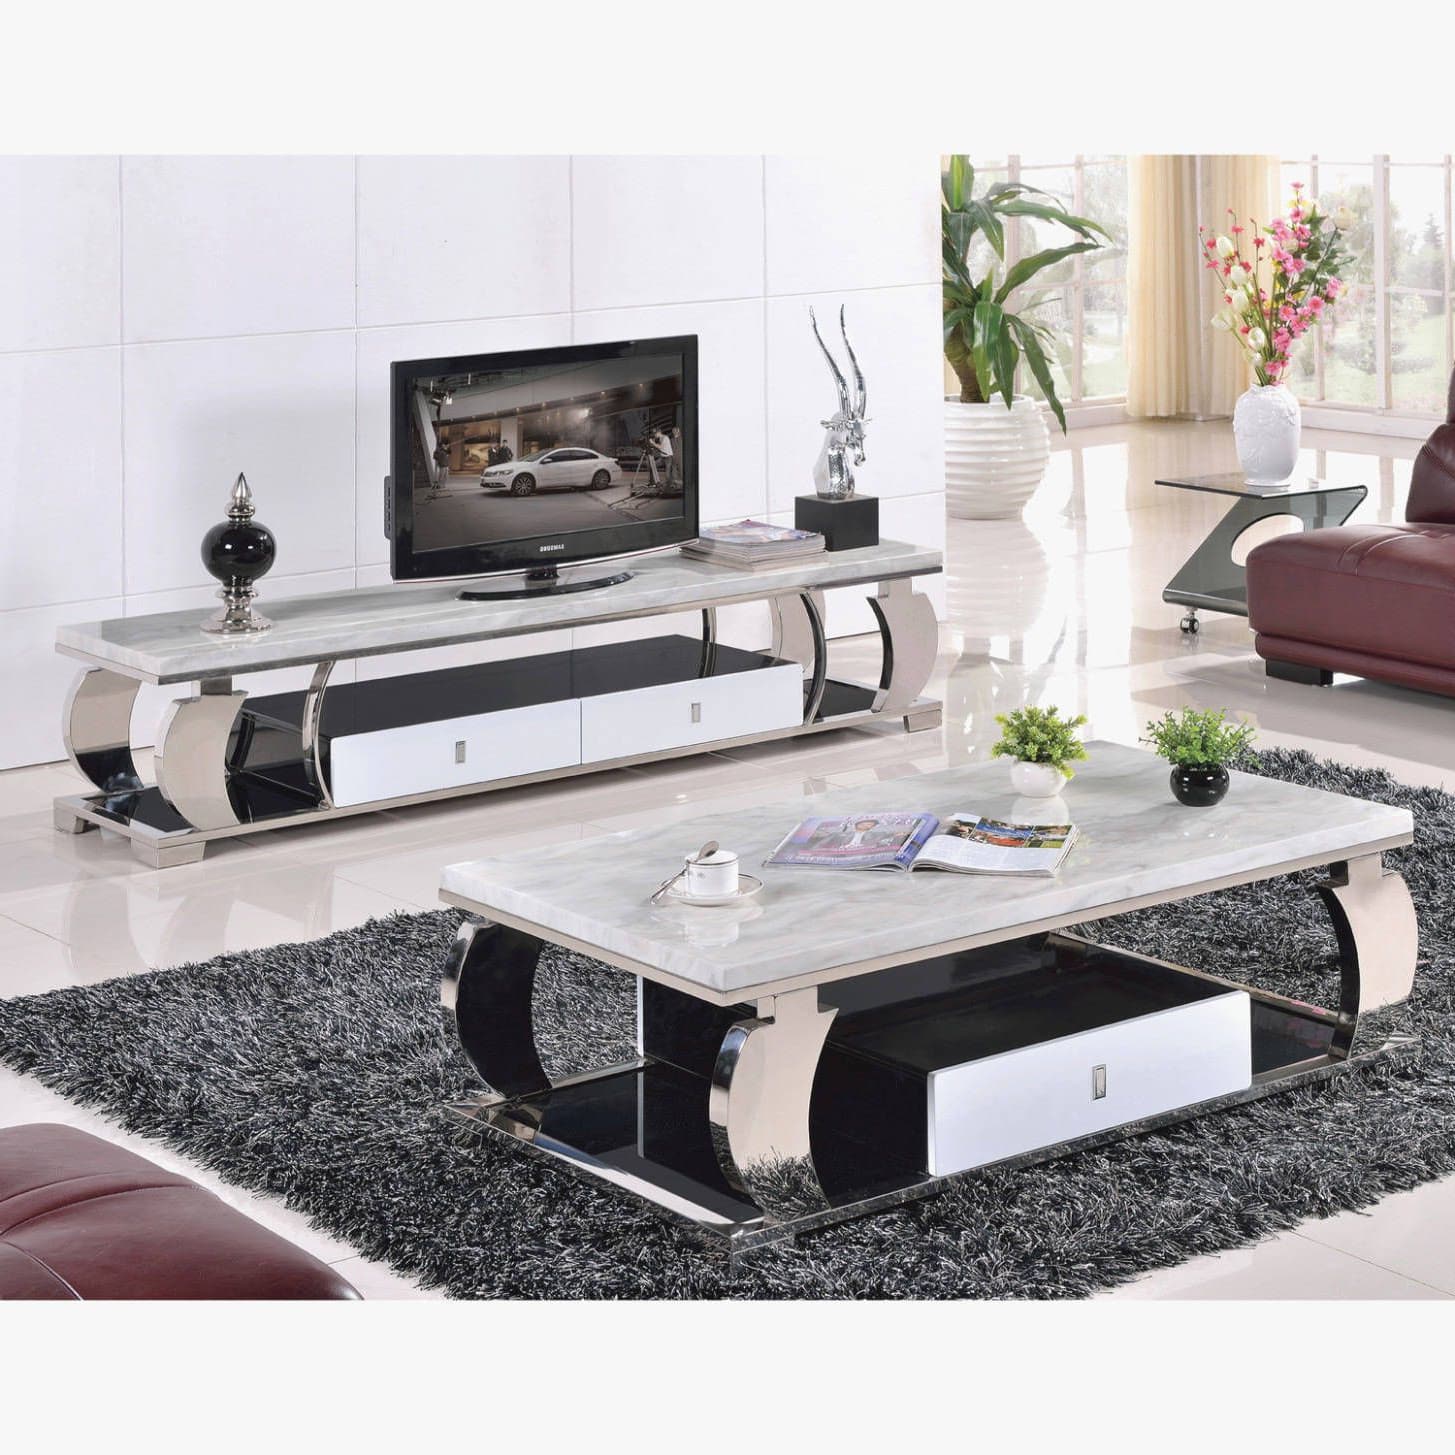 2020 Best of Coffee Tables And Tv Stands Matching